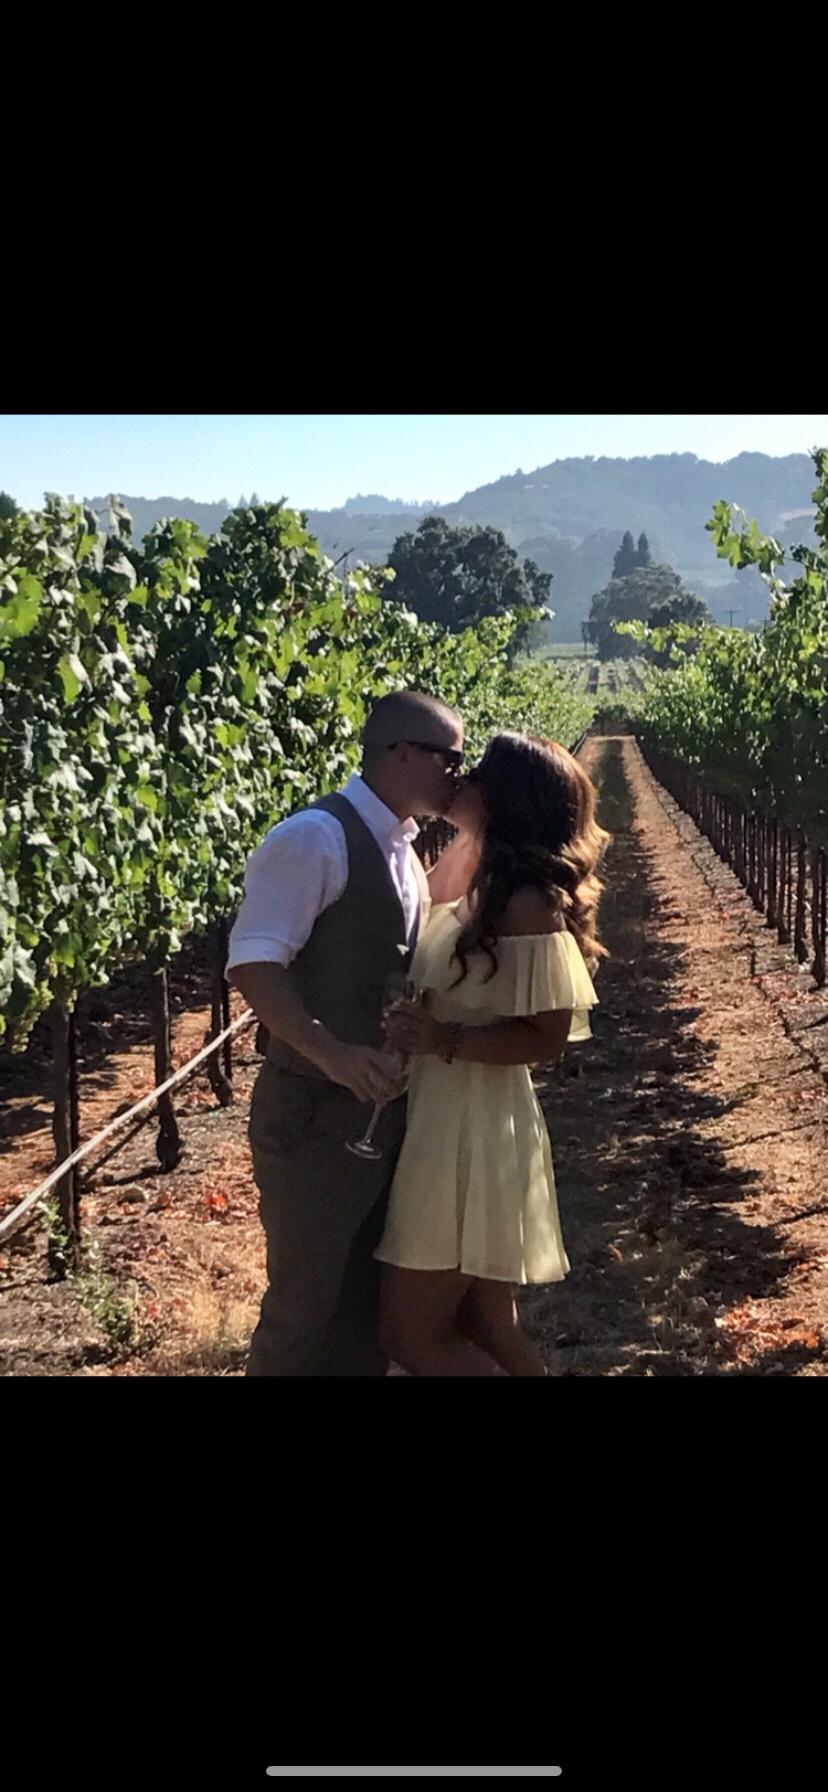 Adventures with you are the greatest- Winos in Napa Valley at a friends wedding.